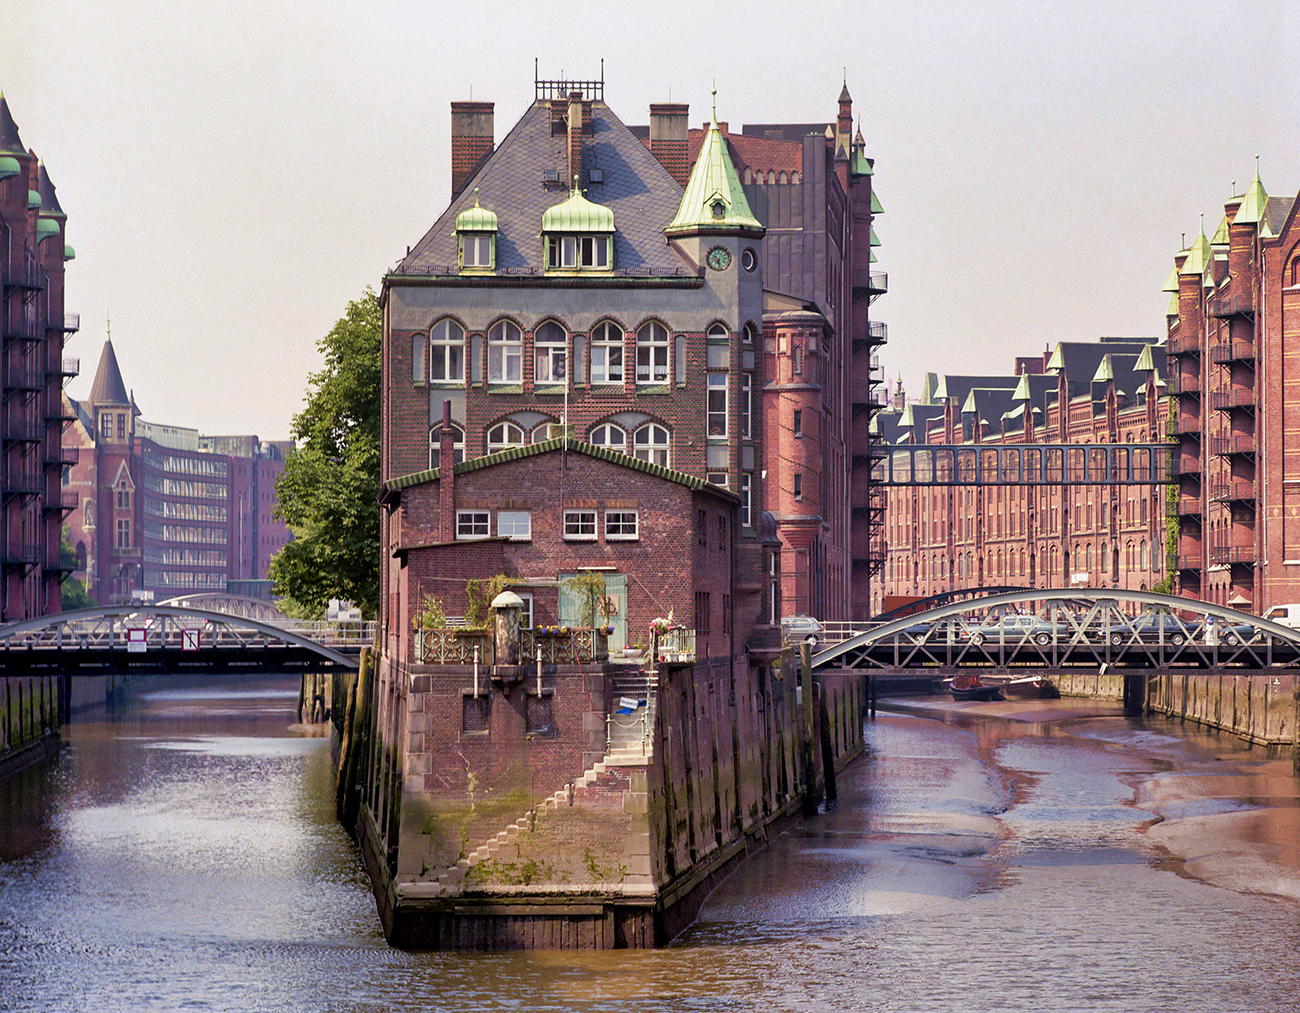 The moated castle of the Speicherstadt